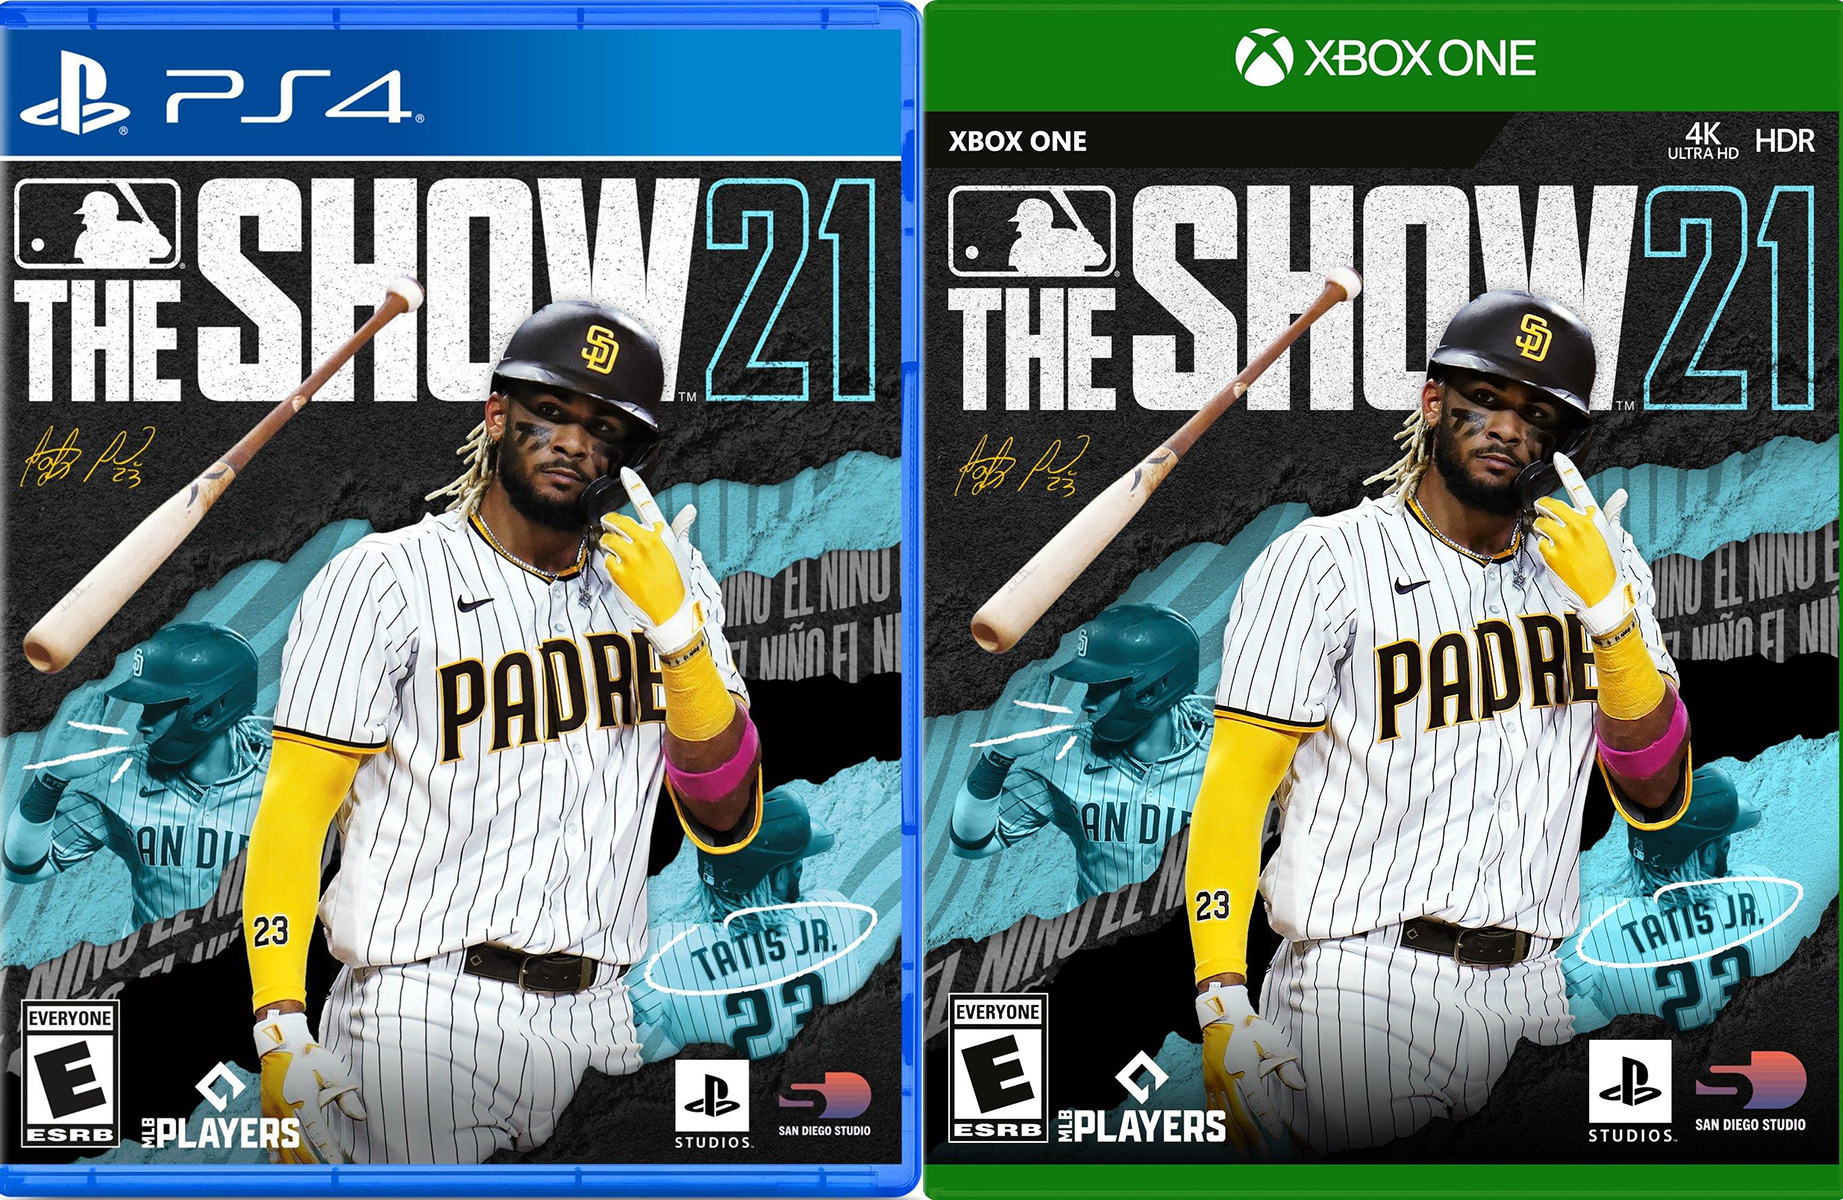 The electric Jazz Chisholm Jr is your MLB The Show 23 cover athlete   PlayStationBlog